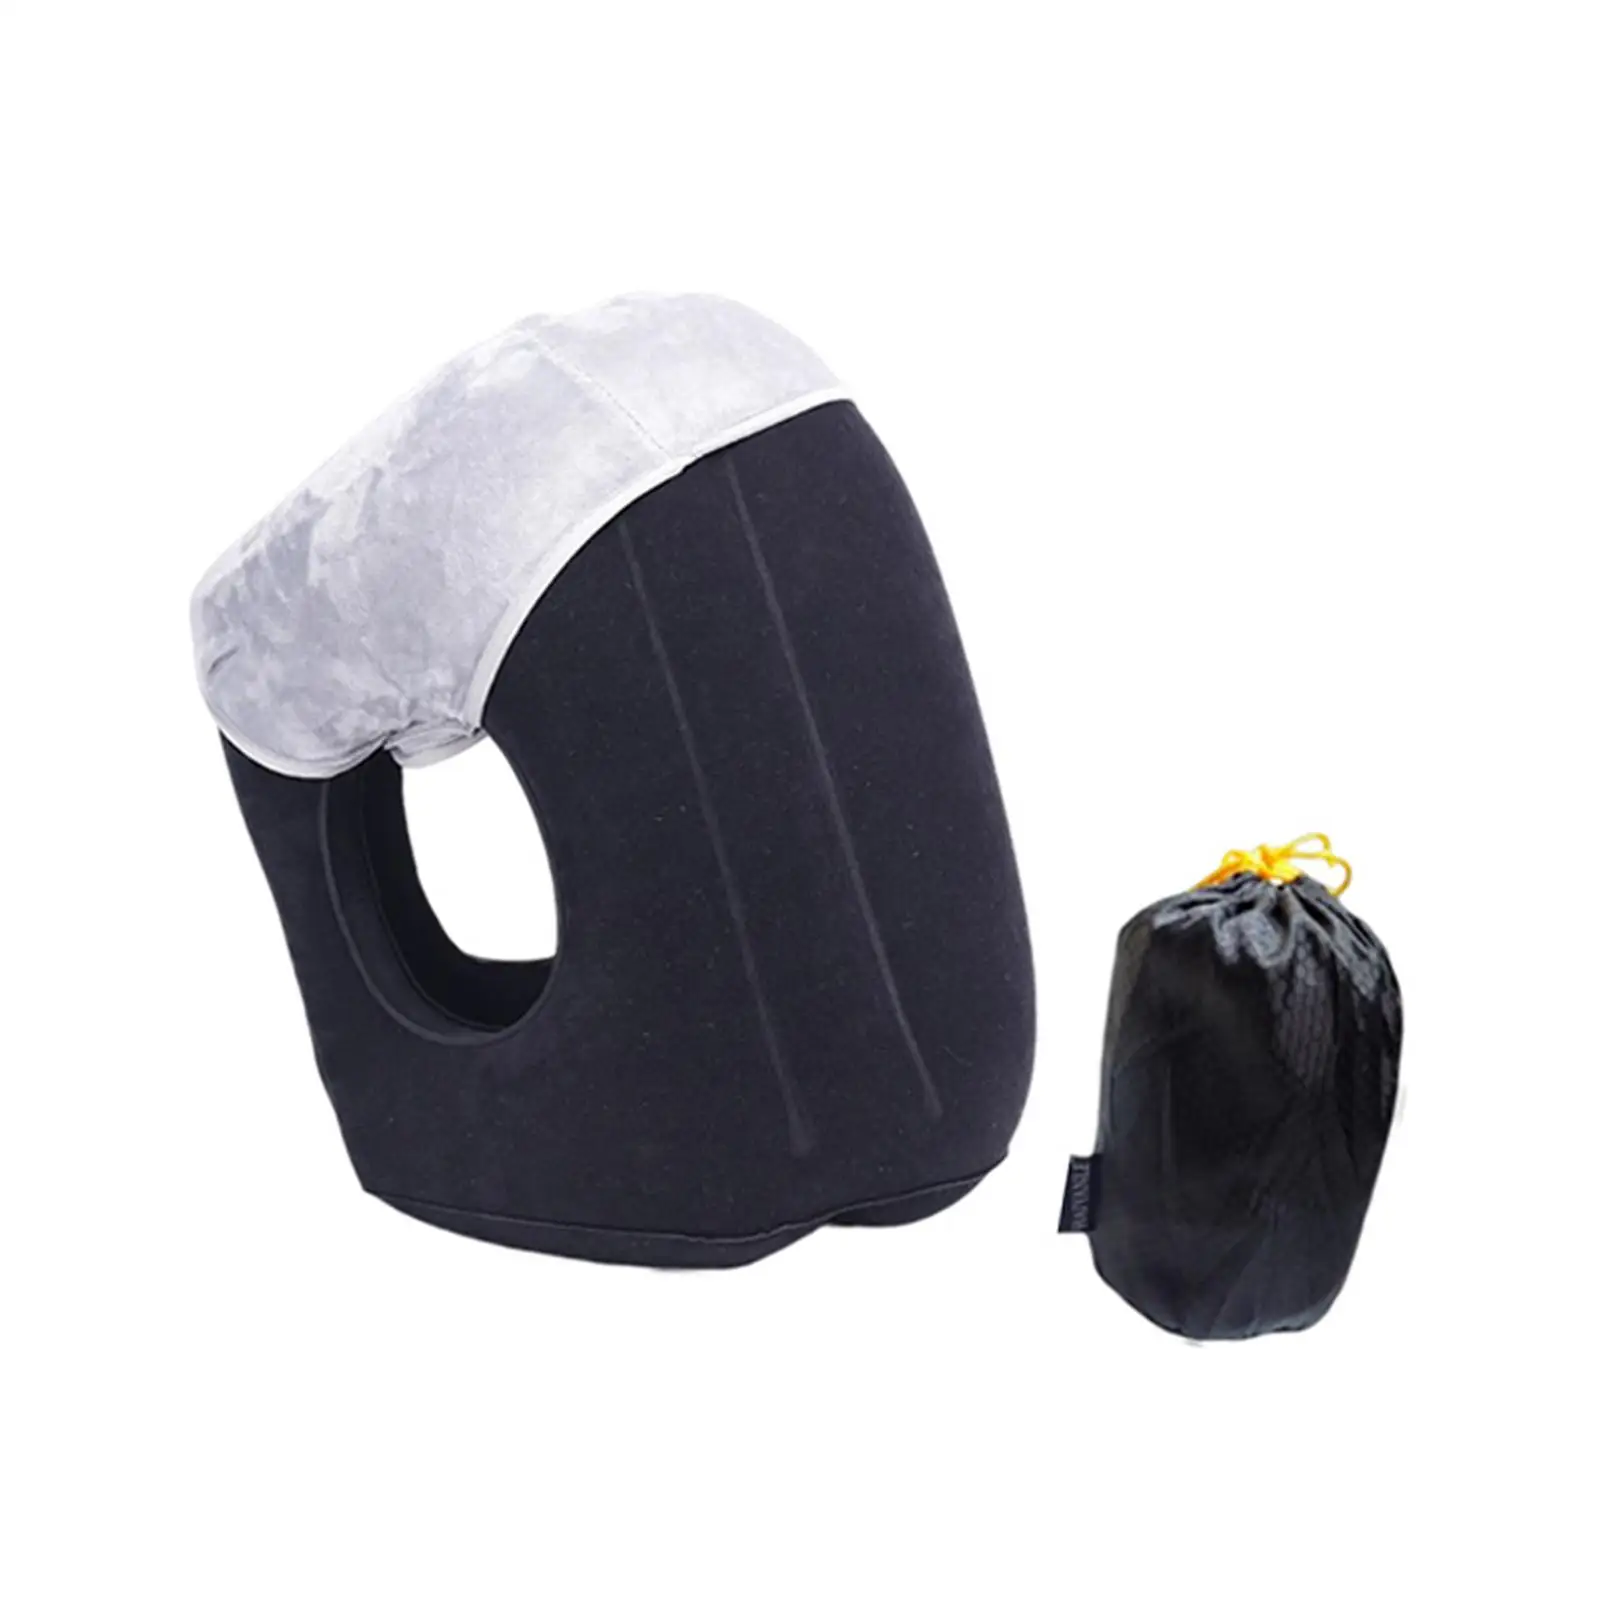 Folding Inflatable Air Pillow with Drawstring Bag Headrest Inflatable Travel Pillow for Train Plane Bus